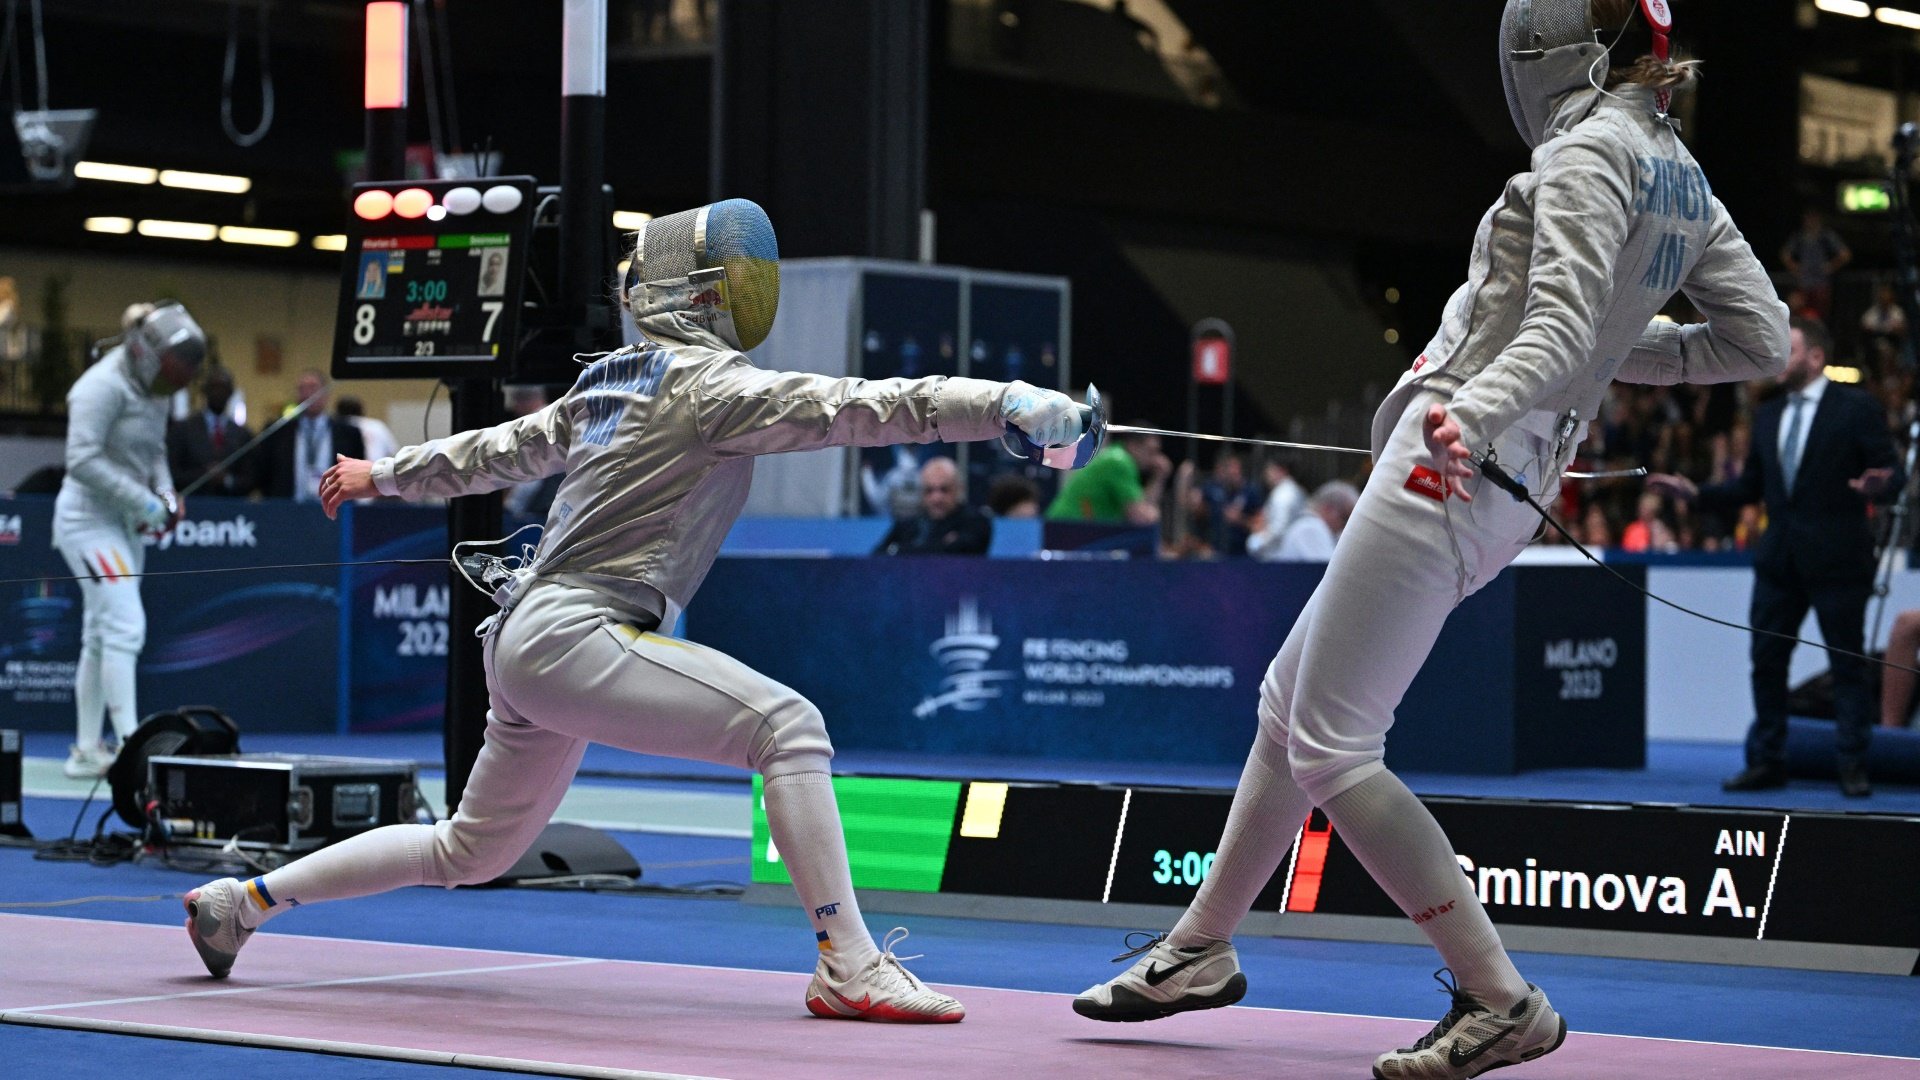 Russian’s “dirty game”: Ukrainian fencer disqualified